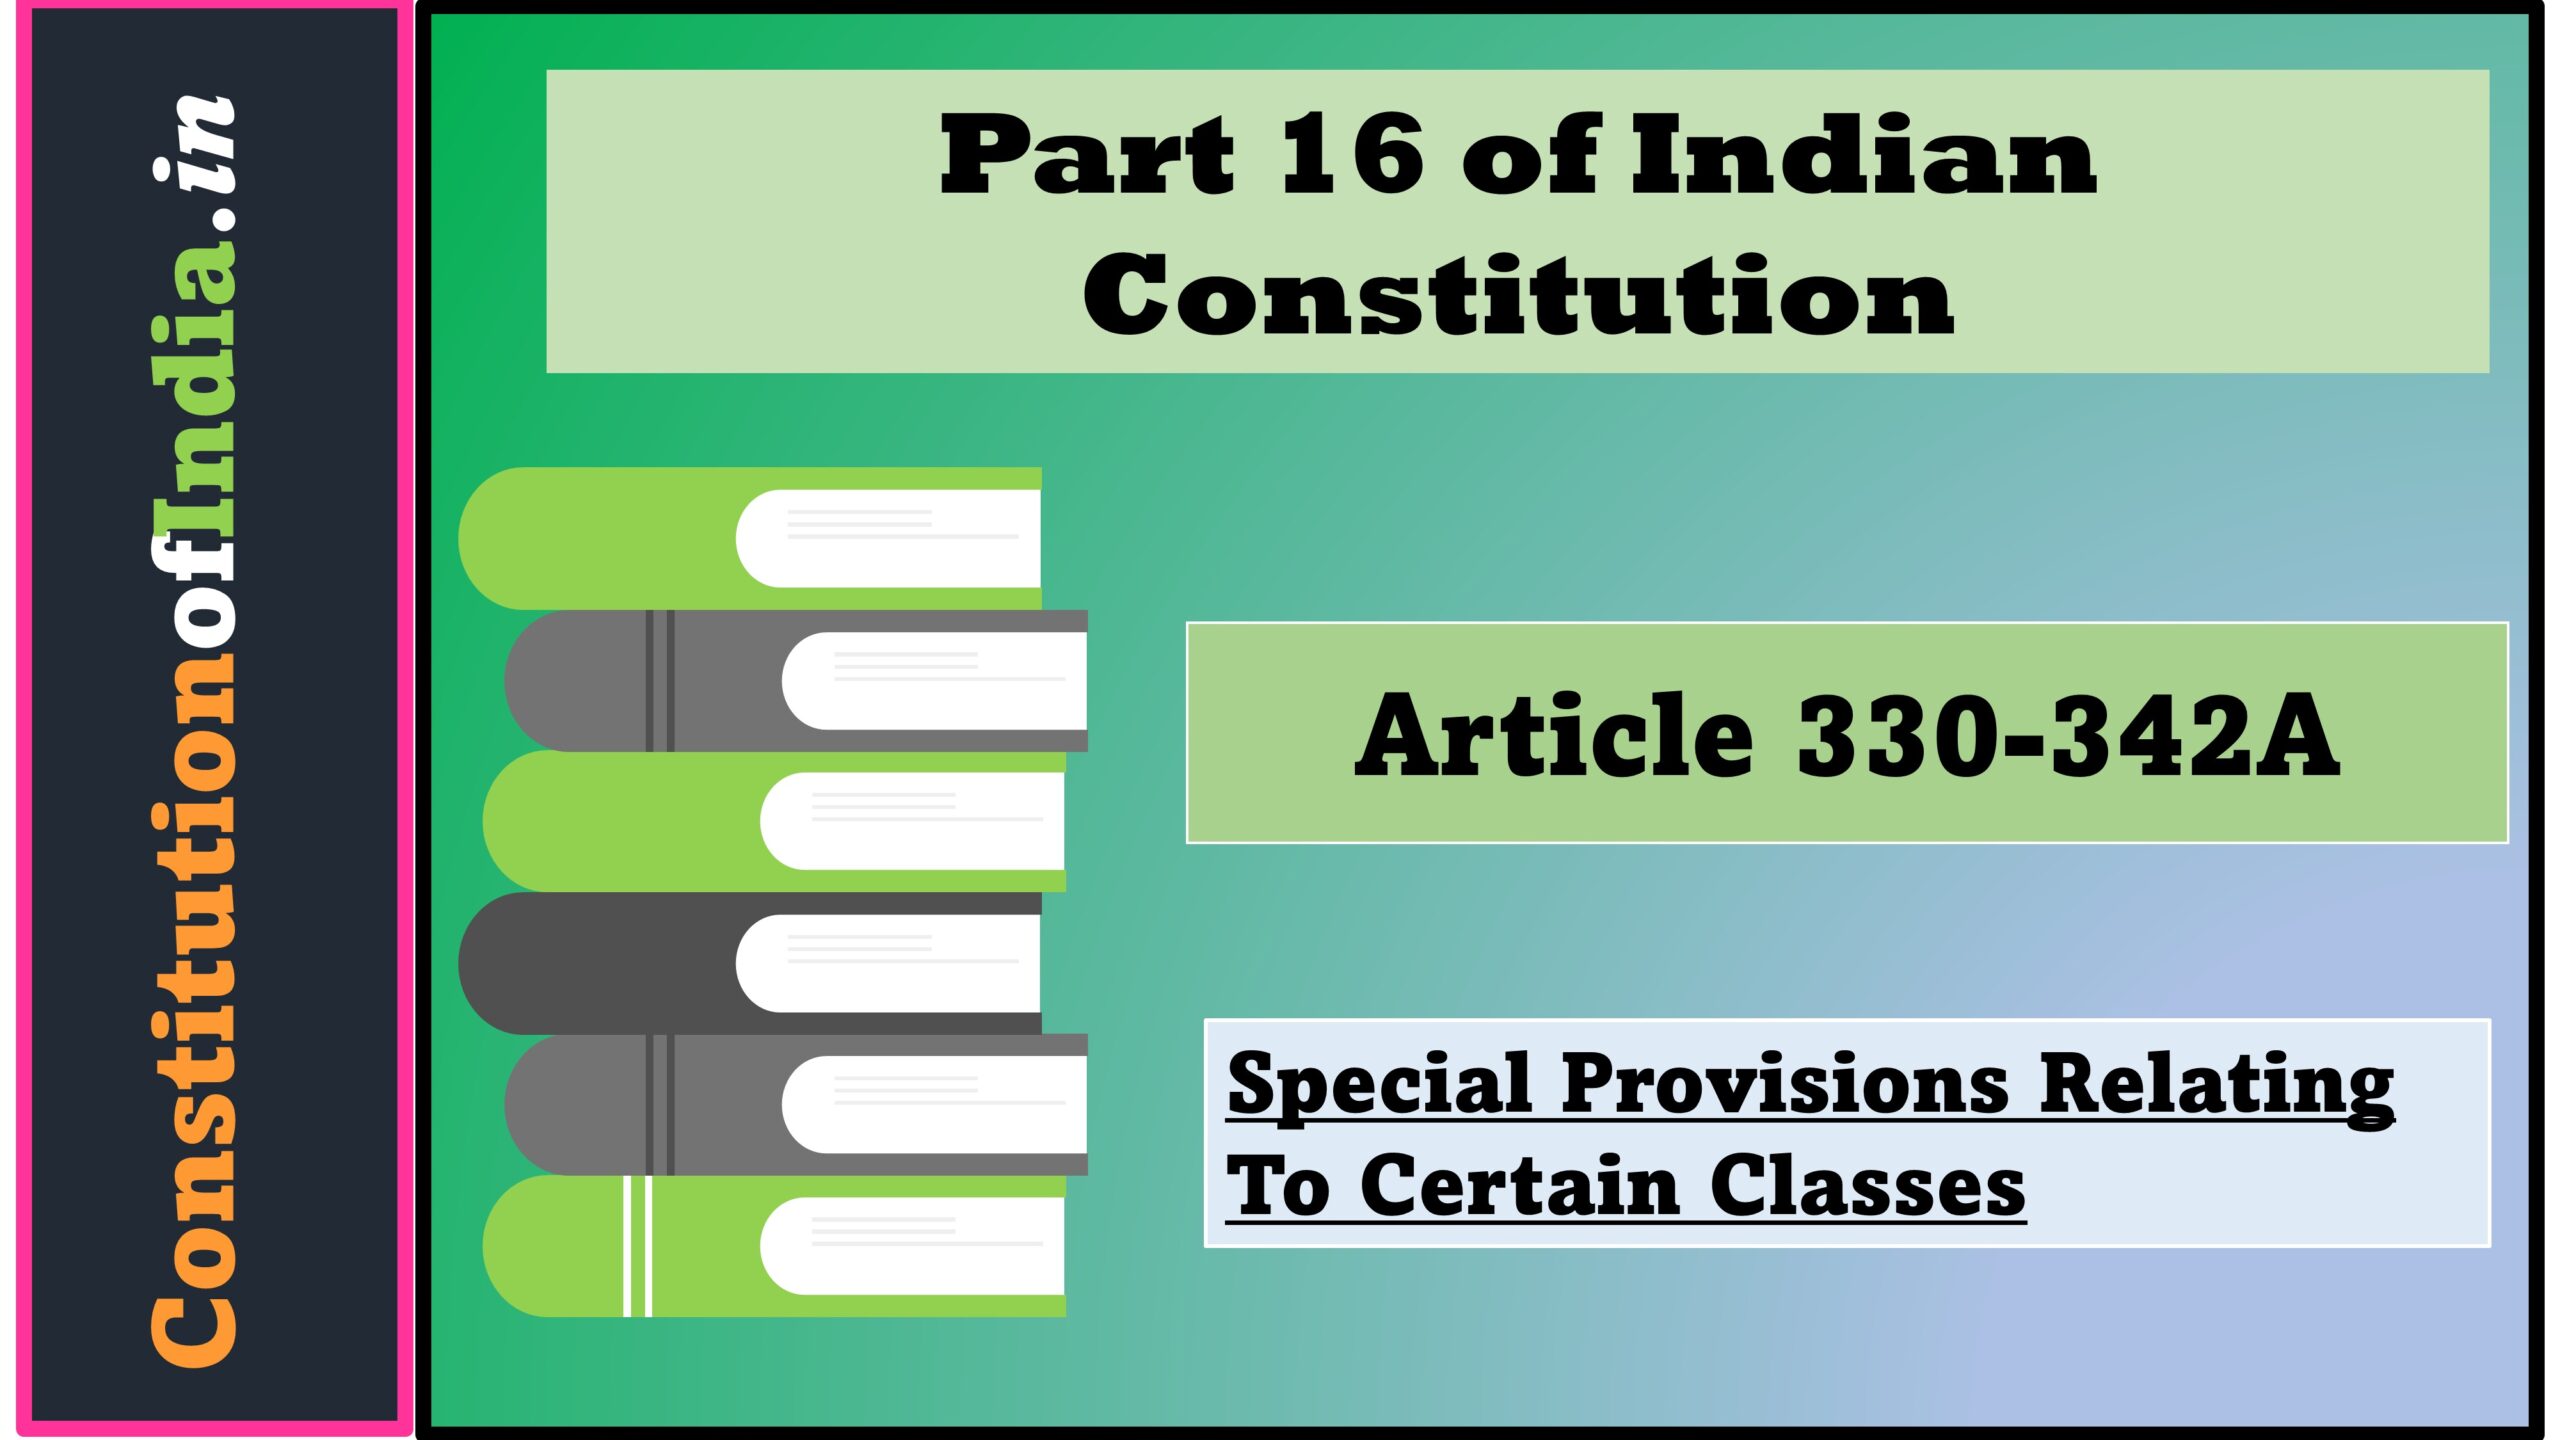 Part 16 of Indian Constitution